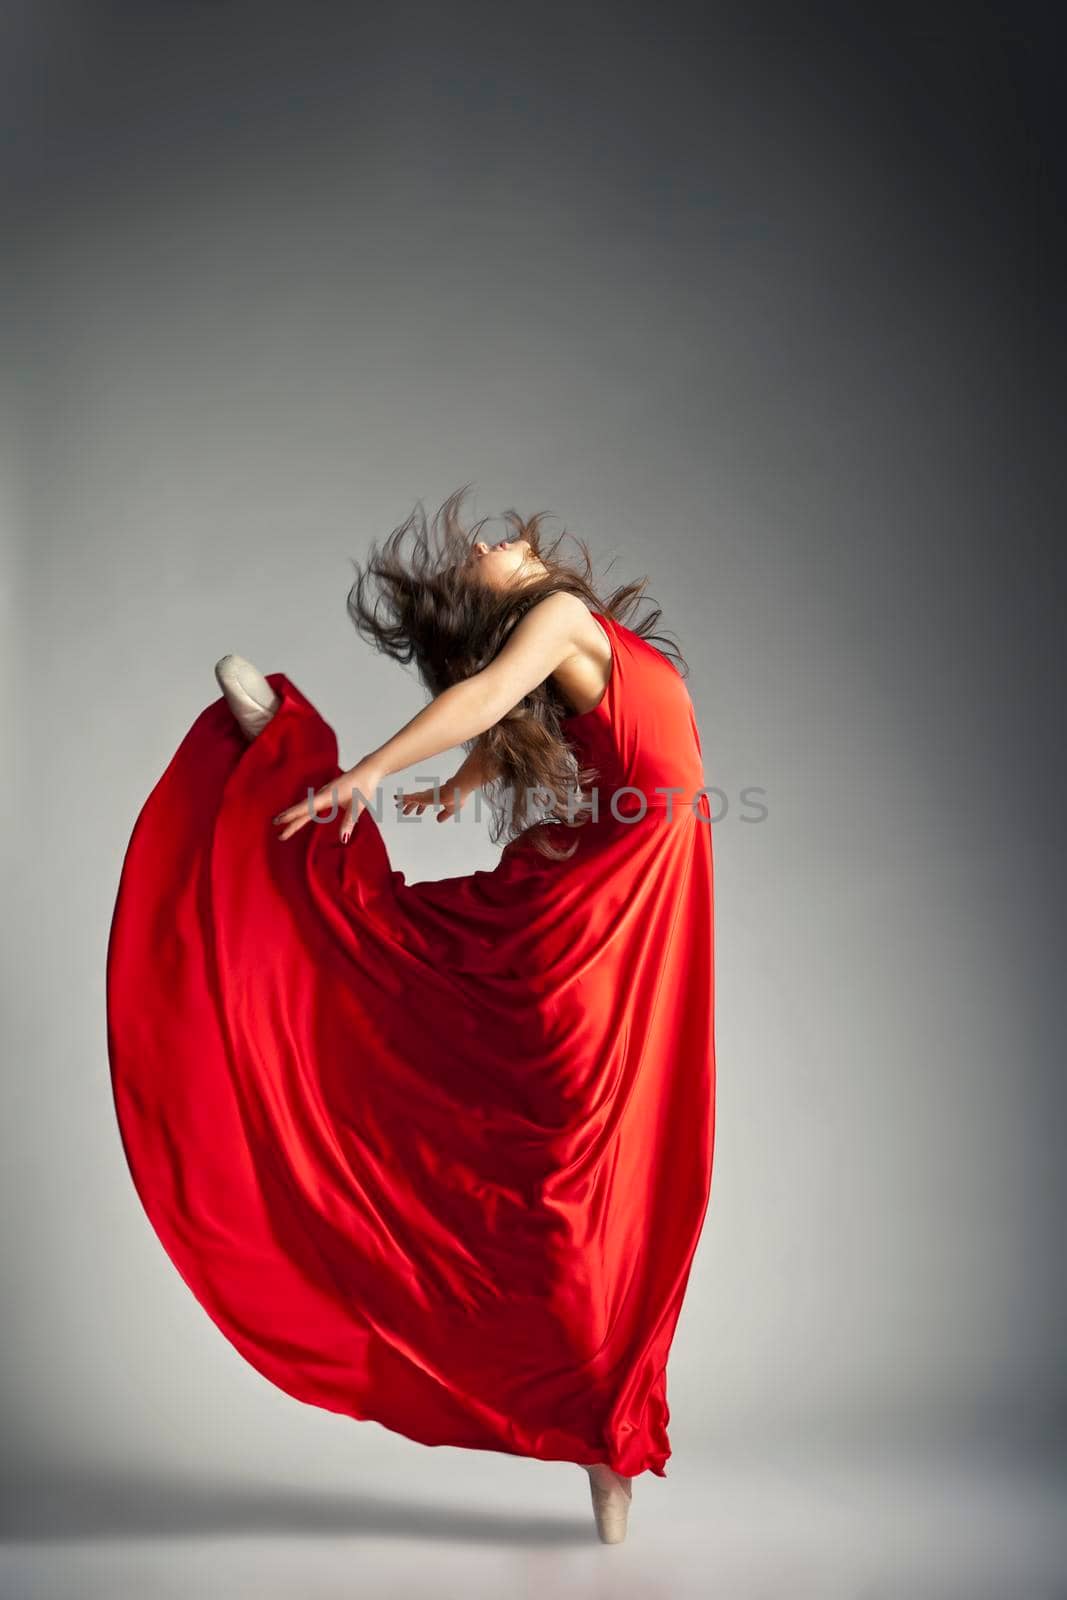 Gorgeous young ballet dancer wearing red dress over dark grey background